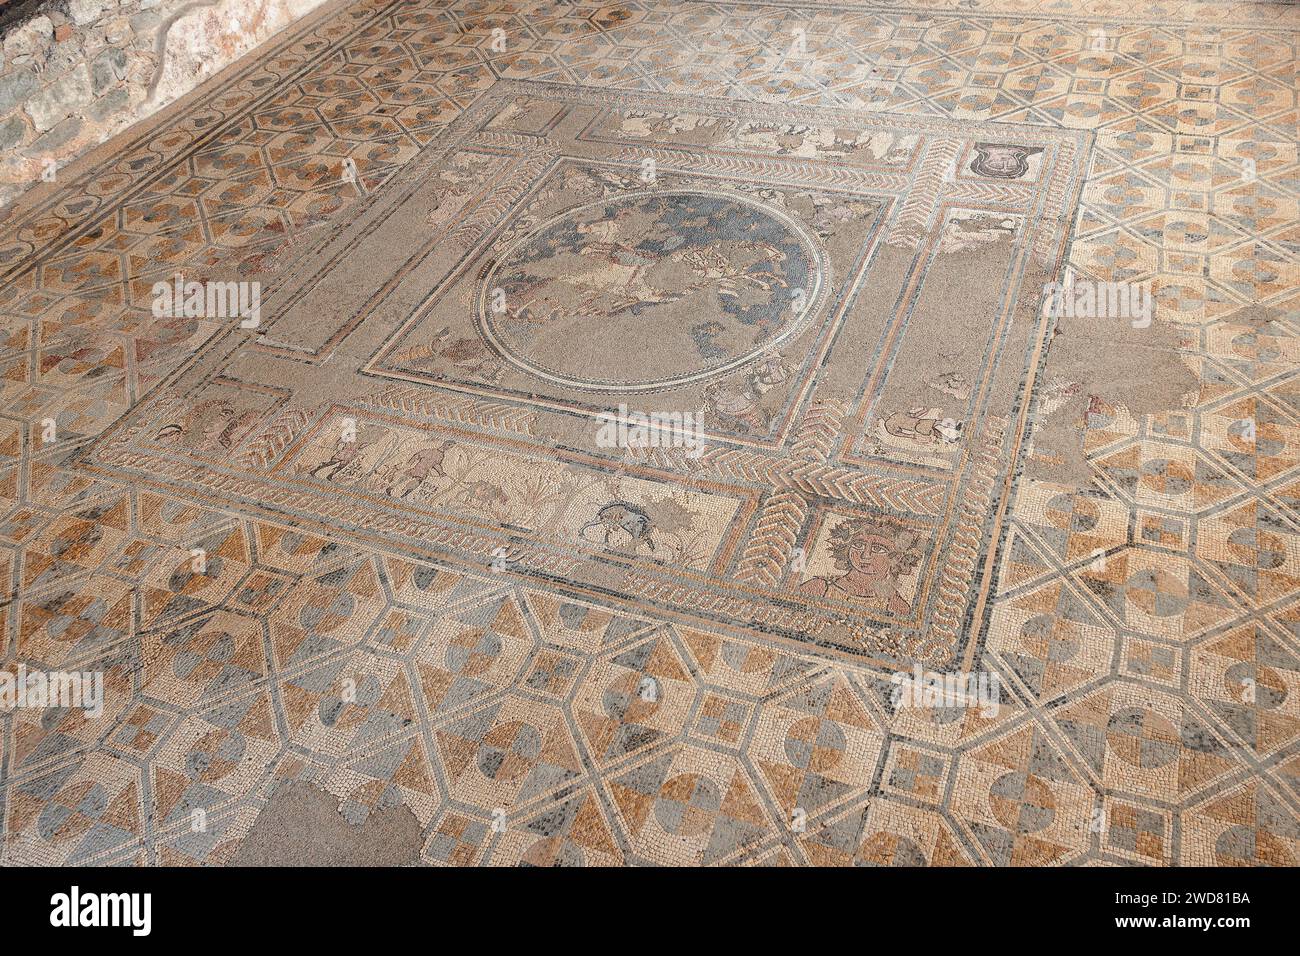 Mosaics found in archaeological explorations of the Roman ruins in Conimbriga, Portugal. Stock Photo